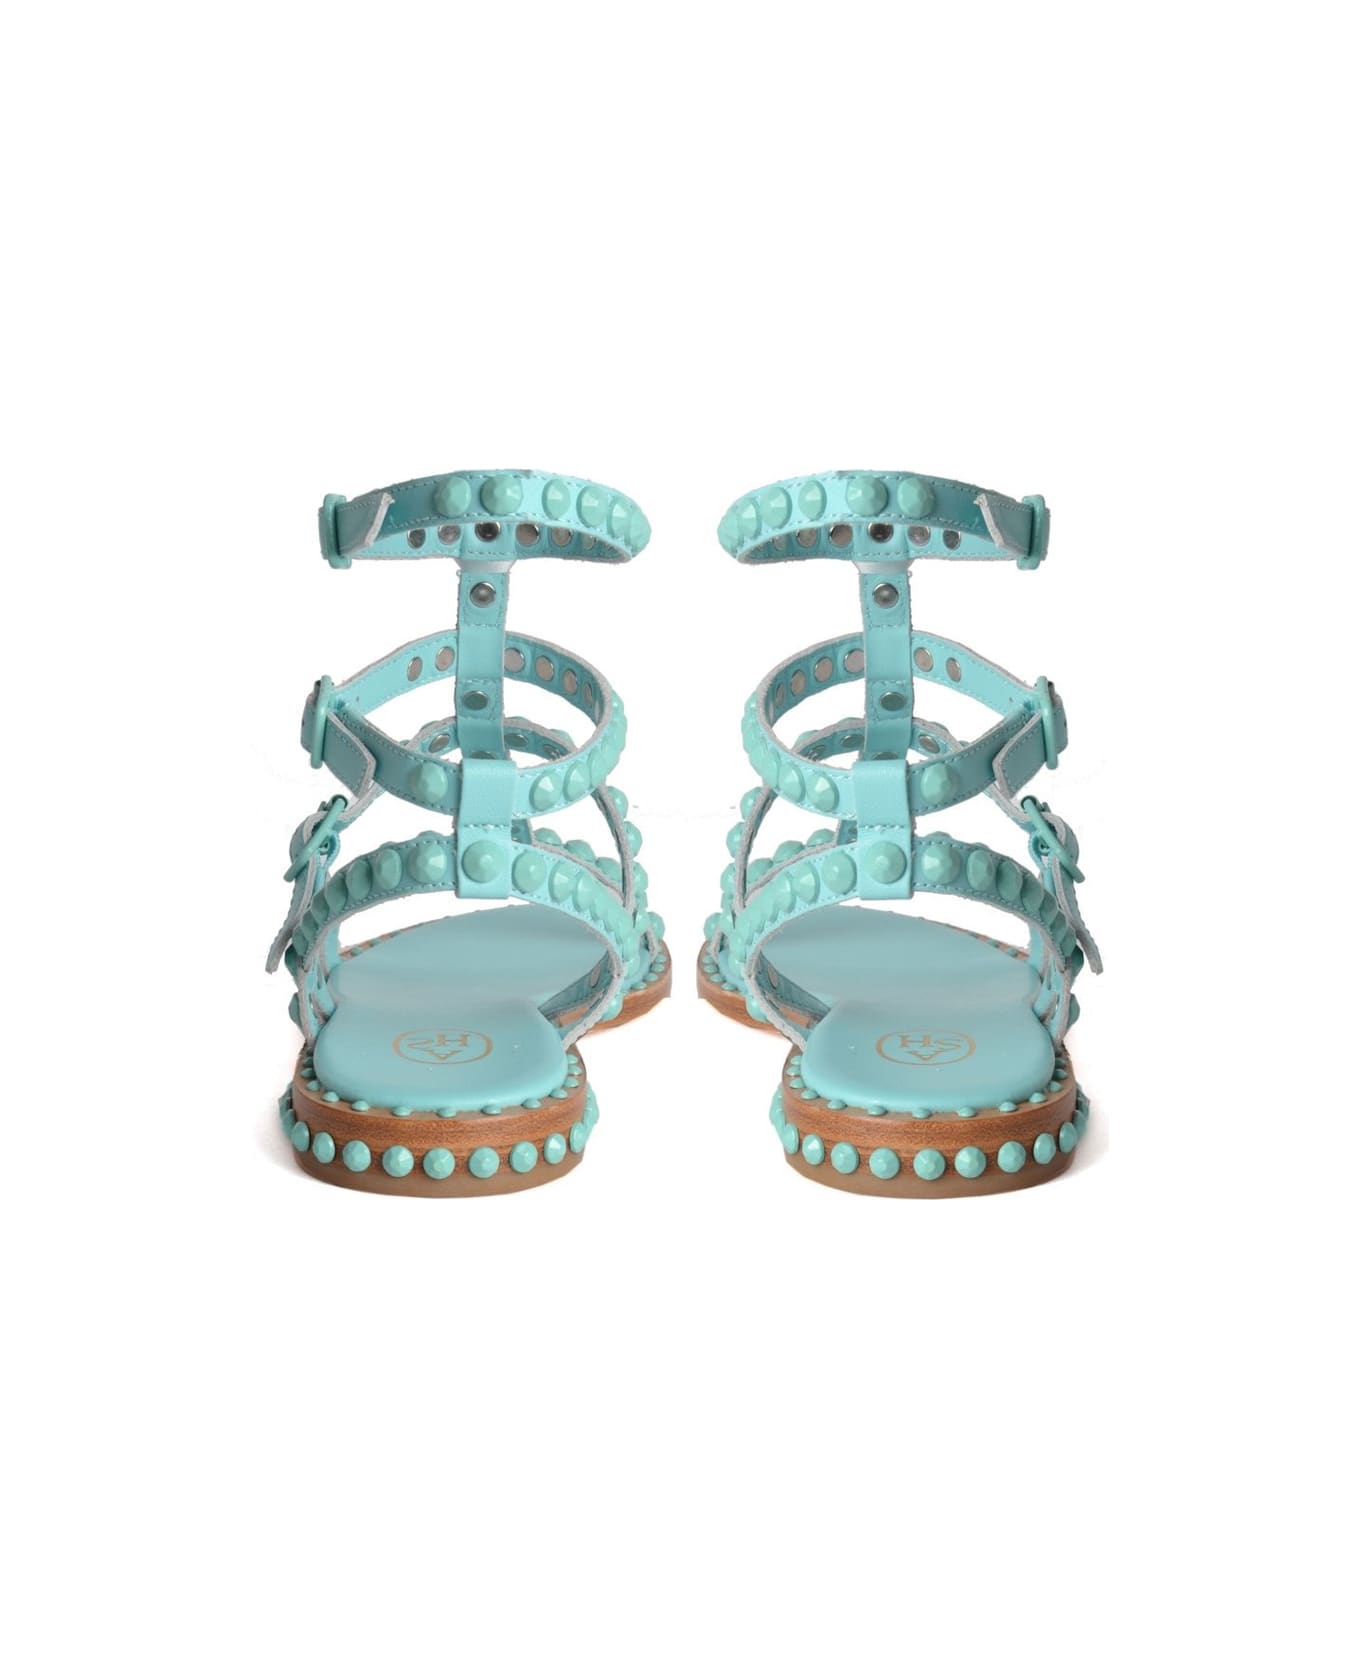 Ash New Crystal Rose Playbis Sandals - Pink